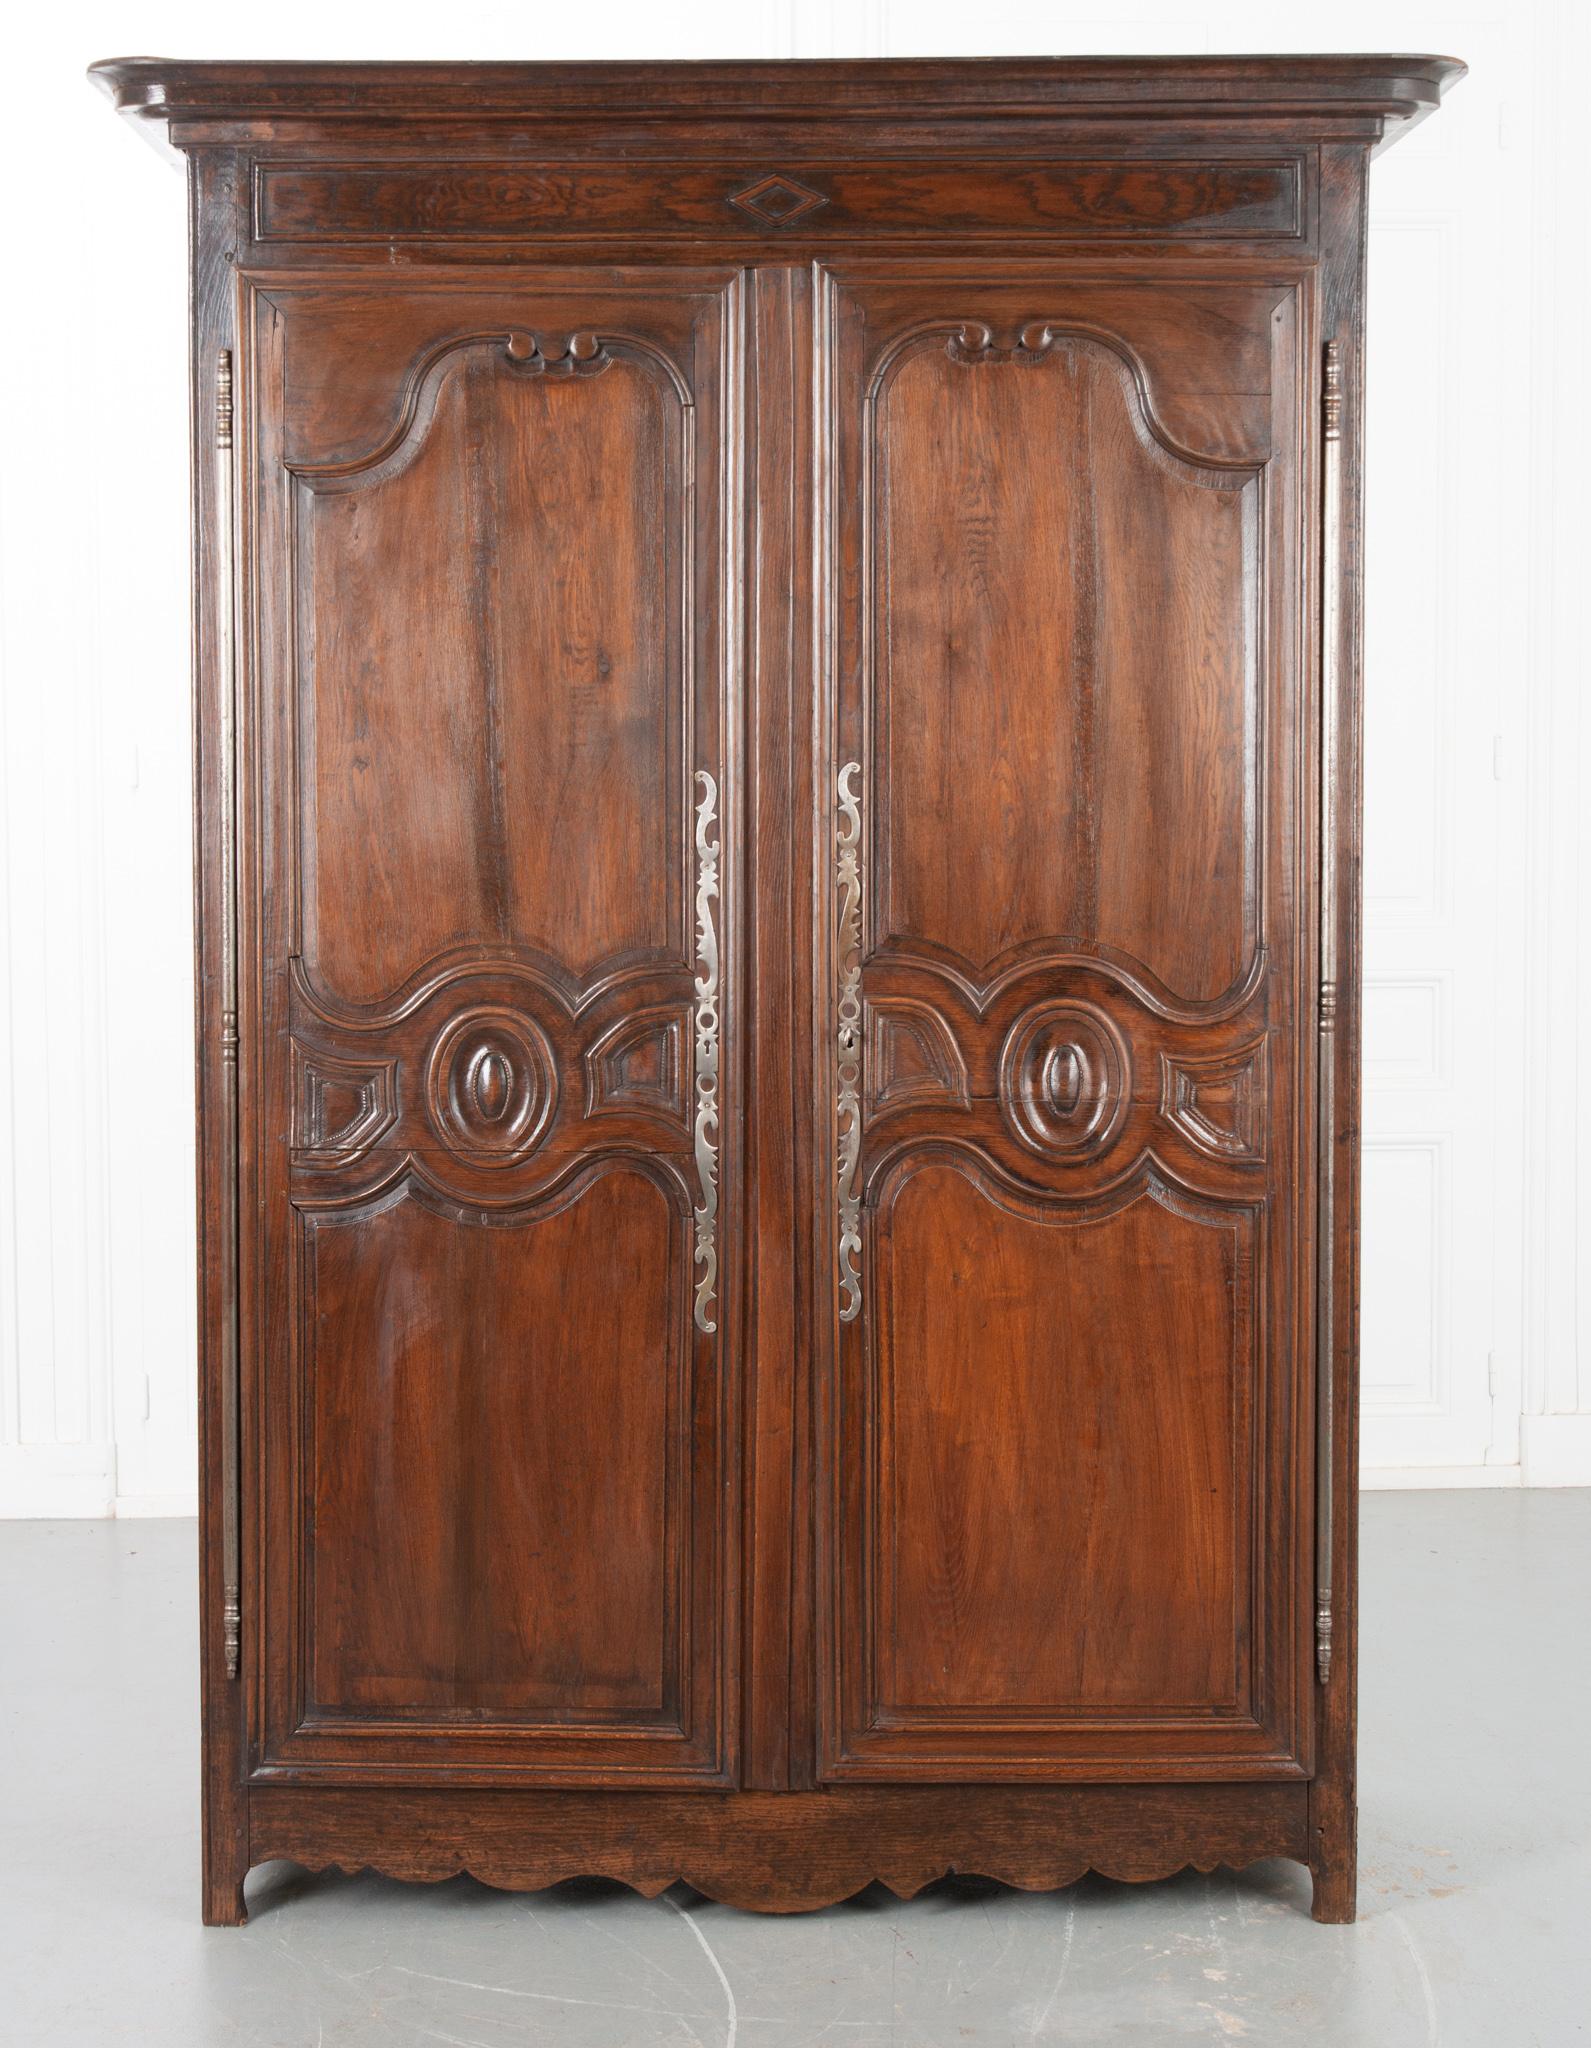 This solid oak armoire from 19th century France is substantial in size and full of hand-carved detail. A large cornice tops the piece above a carved diamond detail. The large doors feature shaped panels with beautiful carving and impressive linear